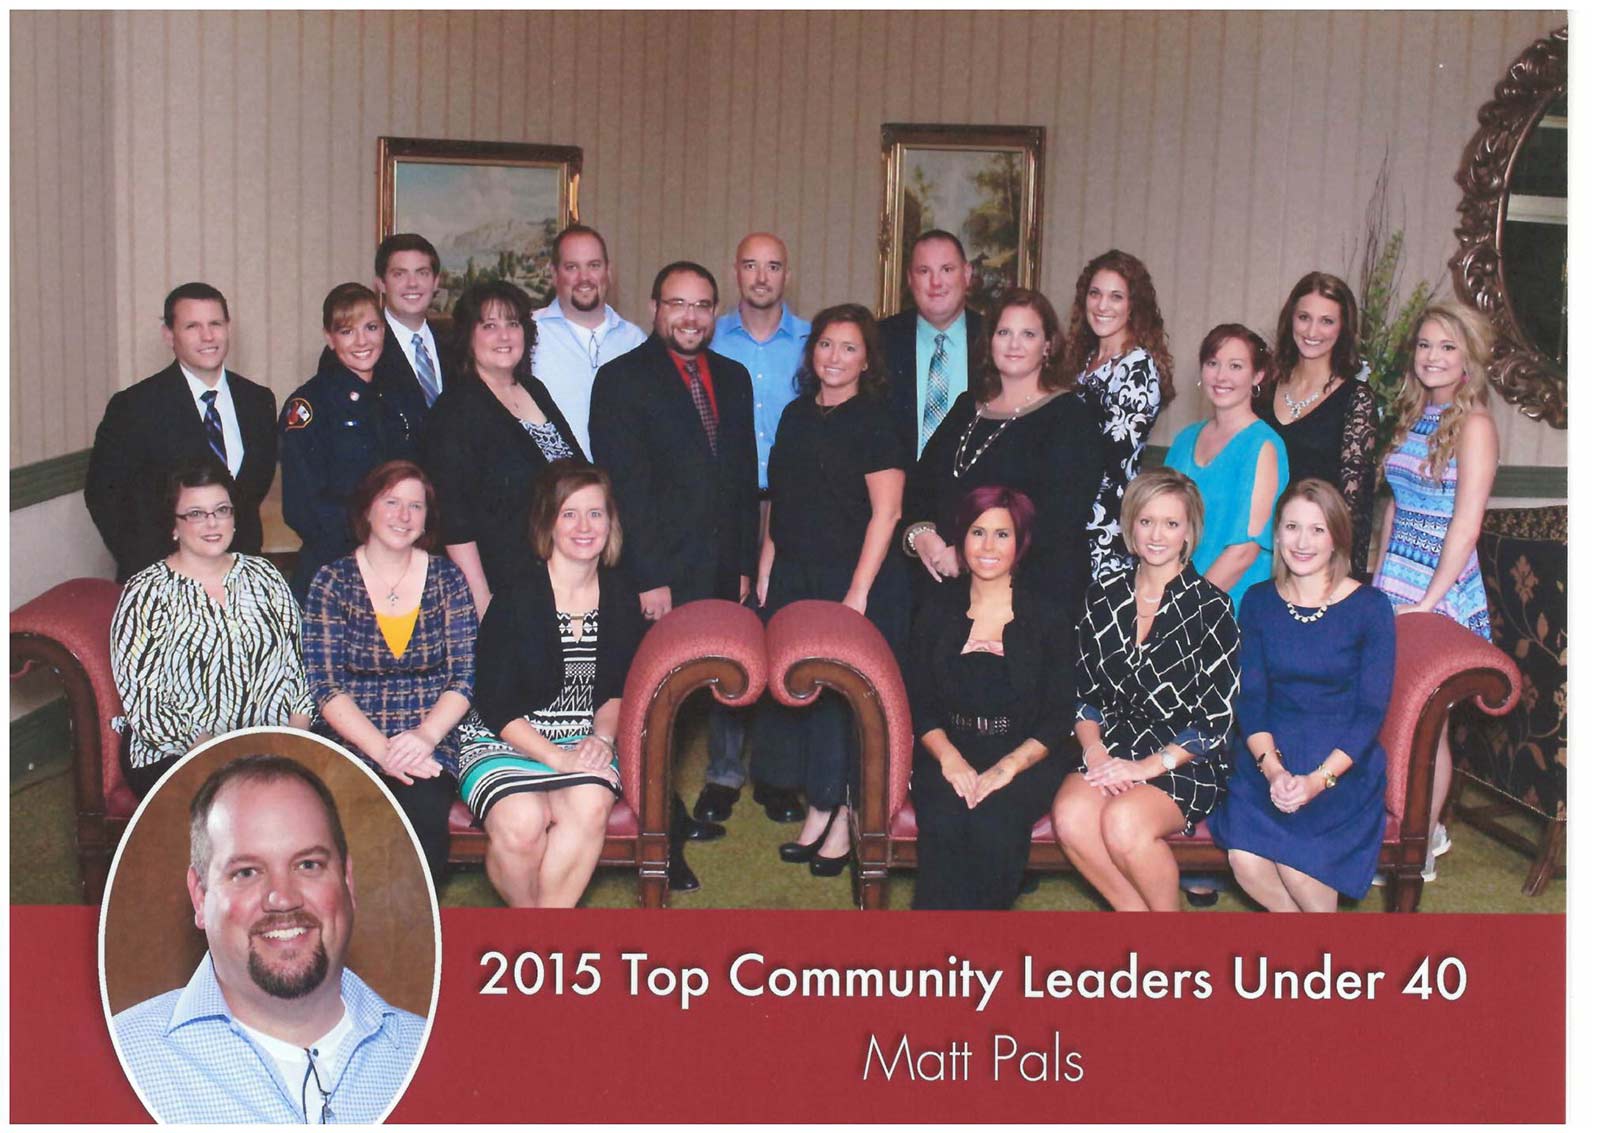 Matt Pals along with other 2015 Top Community Leaders Under 40